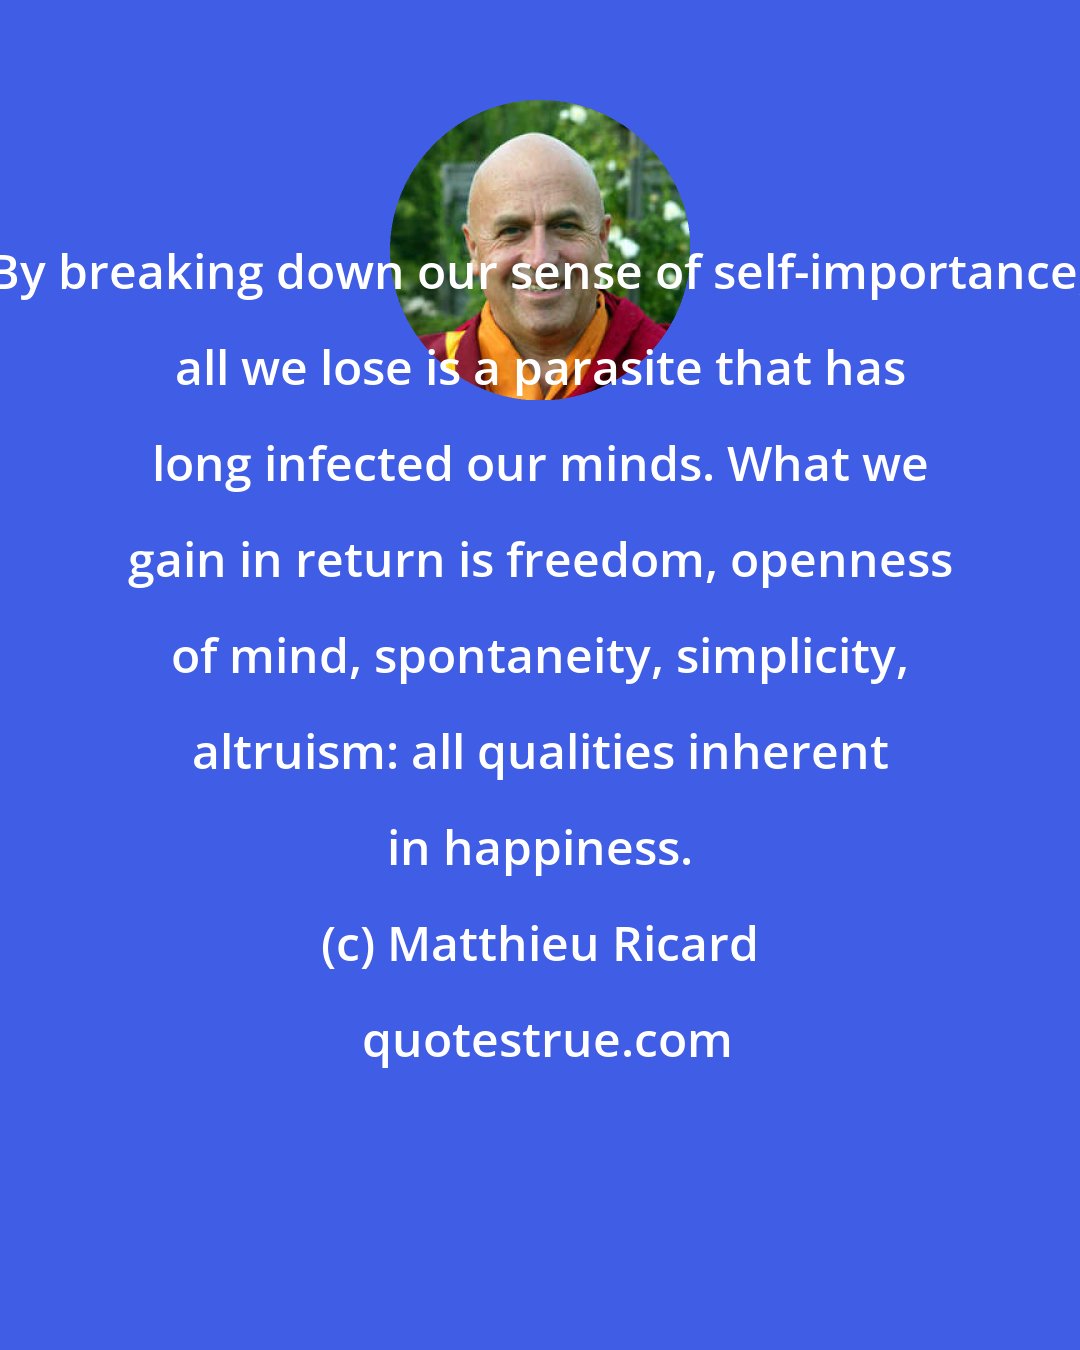 Matthieu Ricard: By breaking down our sense of self-importance, all we lose is a parasite that has long infected our minds. What we gain in return is freedom, openness of mind, spontaneity, simplicity, altruism: all qualities inherent in happiness.